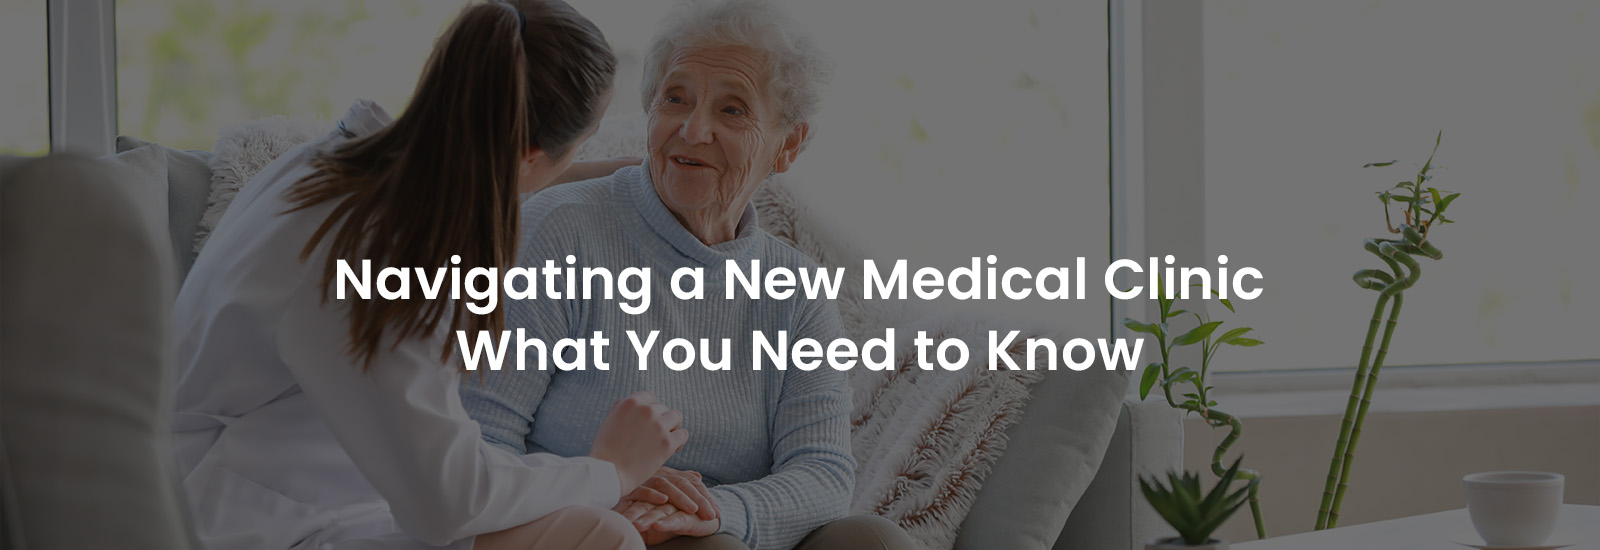 Navigating a New Medical Clinic What You Need to Know | Banner Image